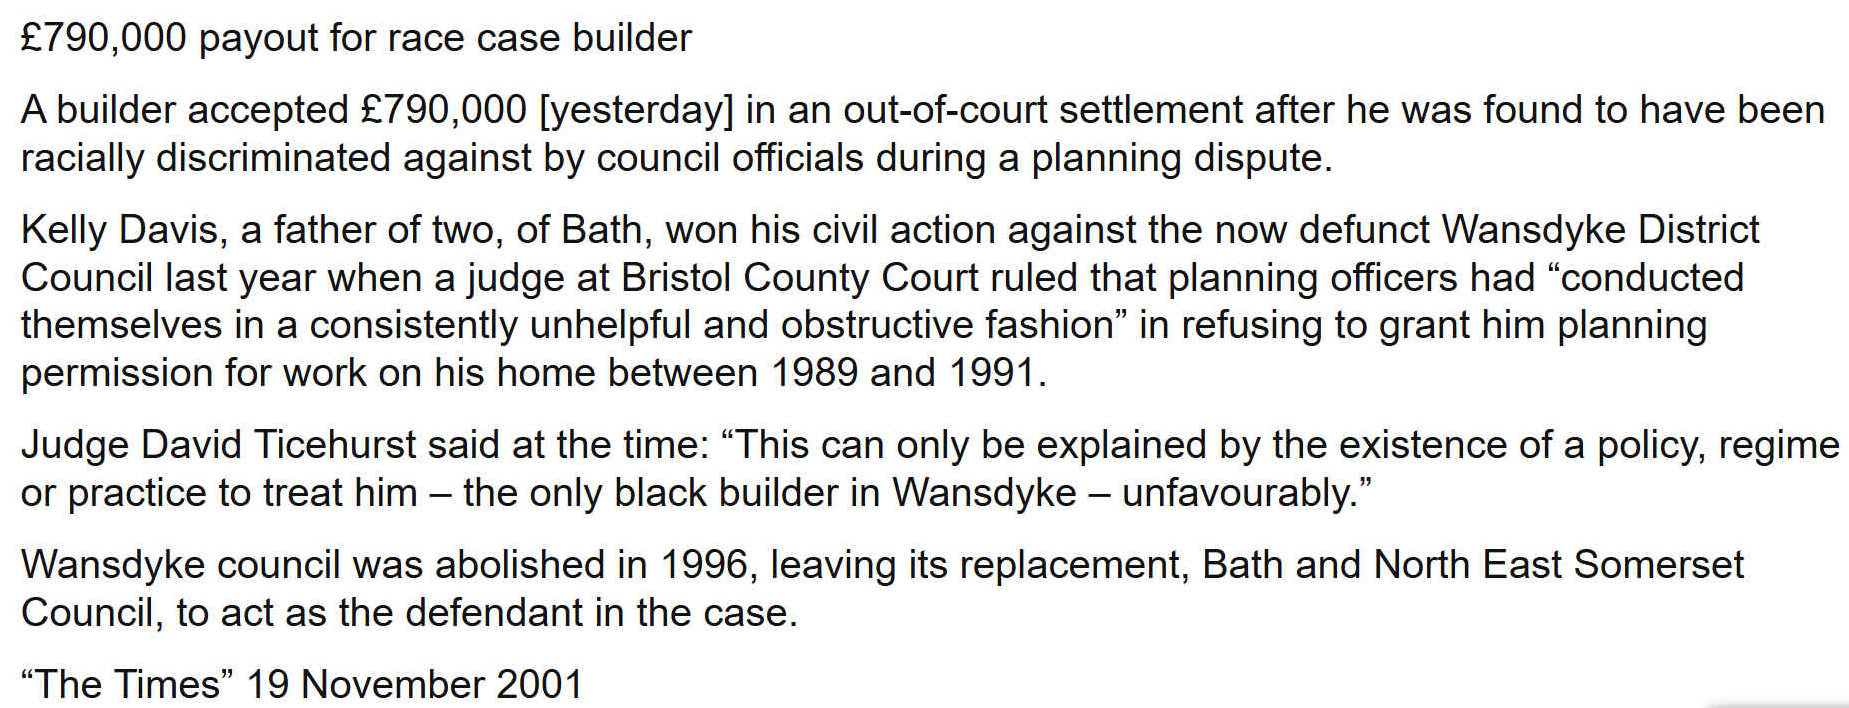 Kelly Davis a father of two, of Bath, won his civil action against the now defunct Wansdyke District Council last year when a Judge at Bristol County Court ruled that planning officers had "conducted themselves in a consistently unhelpful and obstructive fashion" in refusing to grant him planning permission for work on his home between 1989 and 1991.